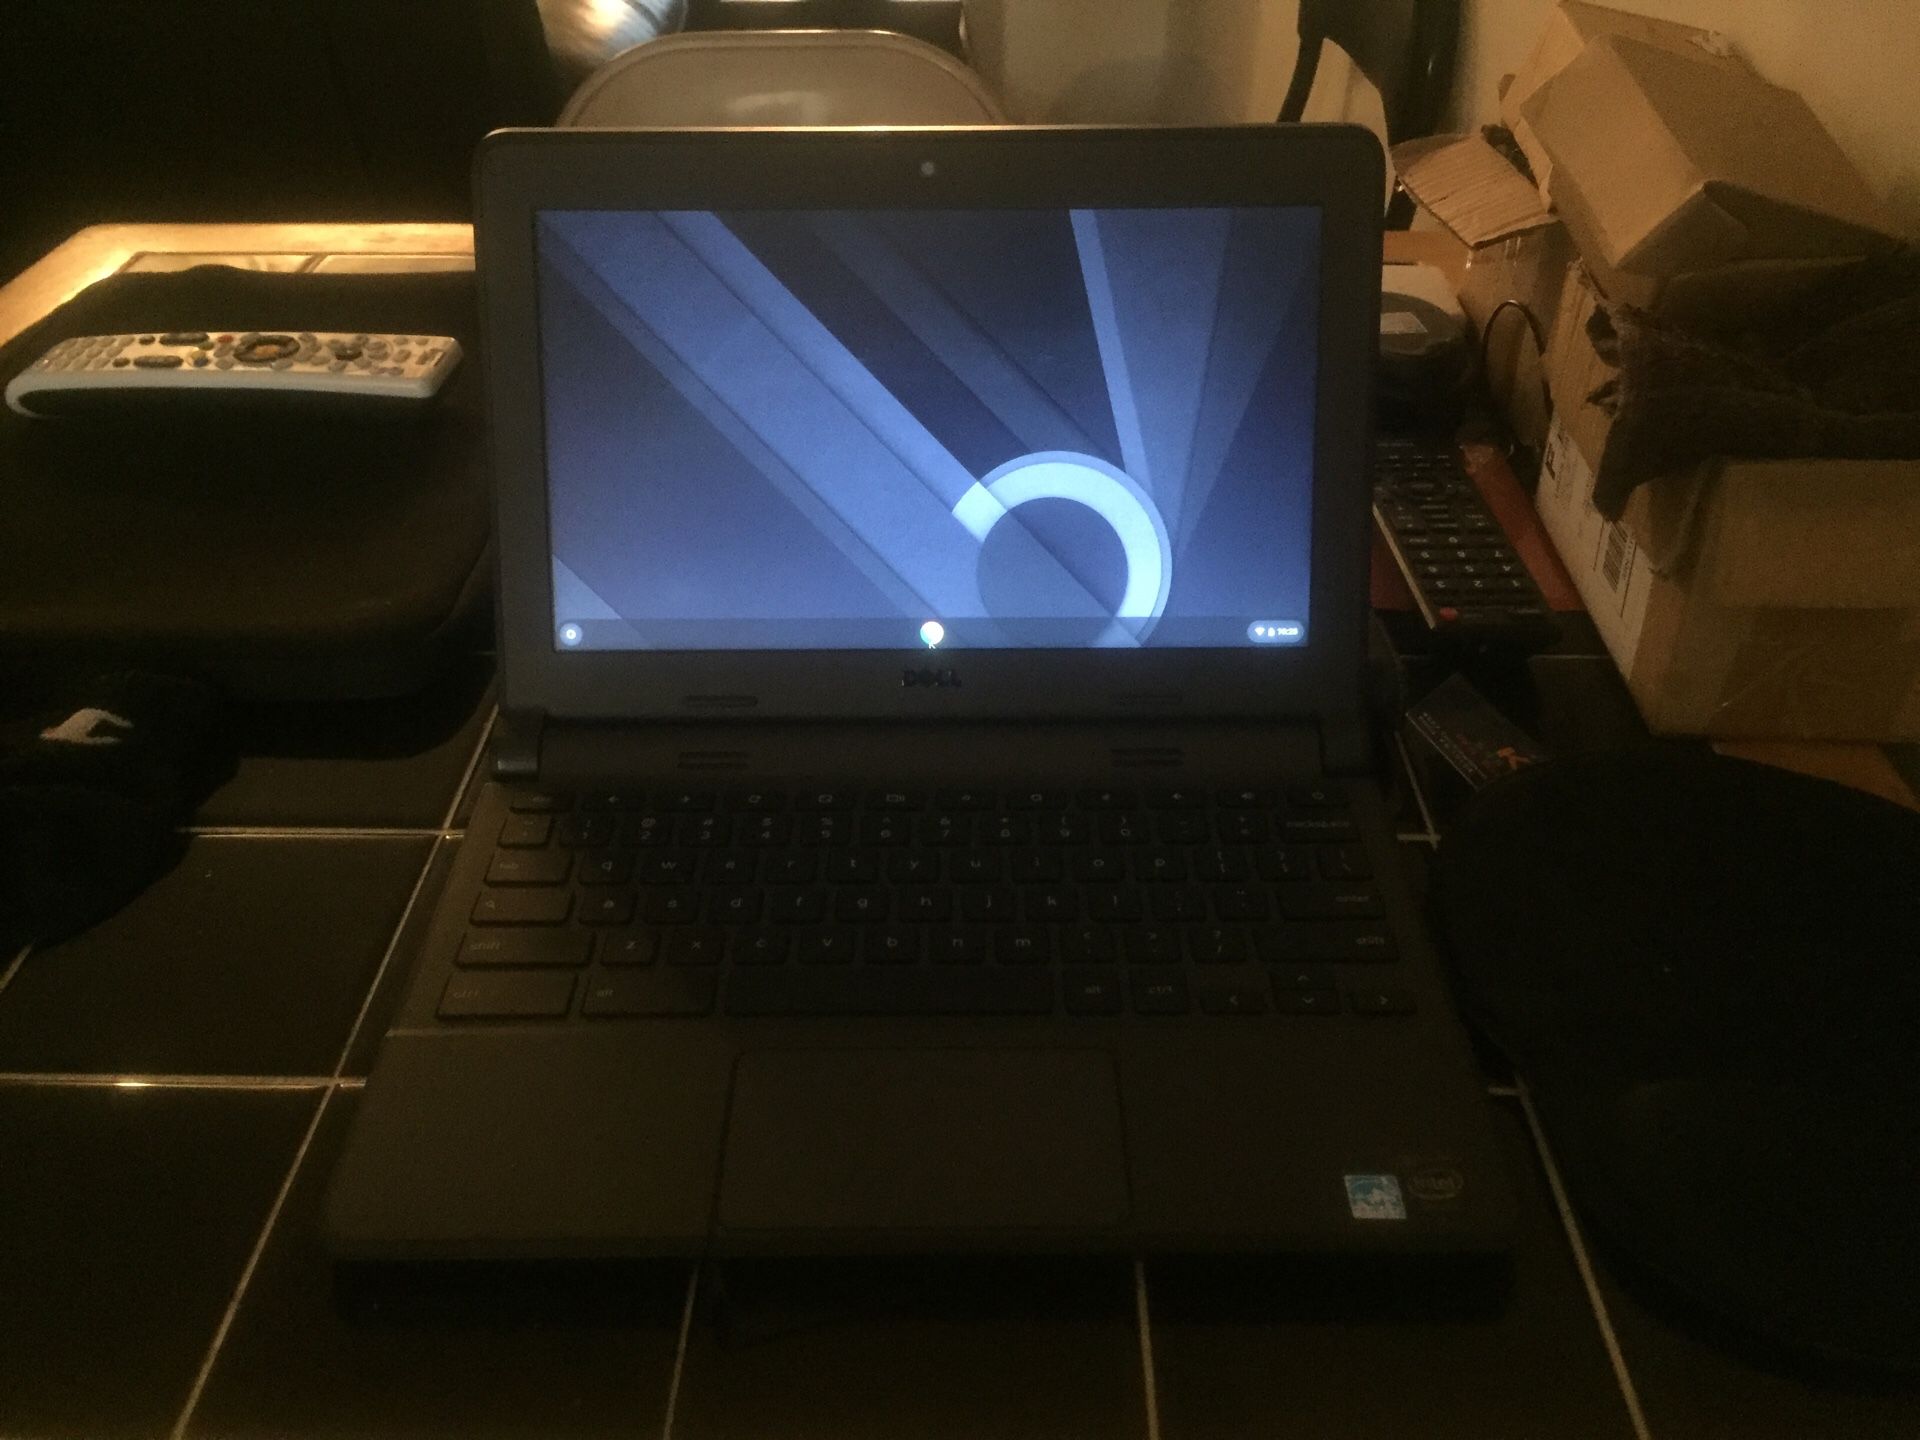 Dell Chromebook 11 CHROME OS CHARGER INCLUDED WEBCAM WIFI WORKING CLEARED OUT READY TO GO